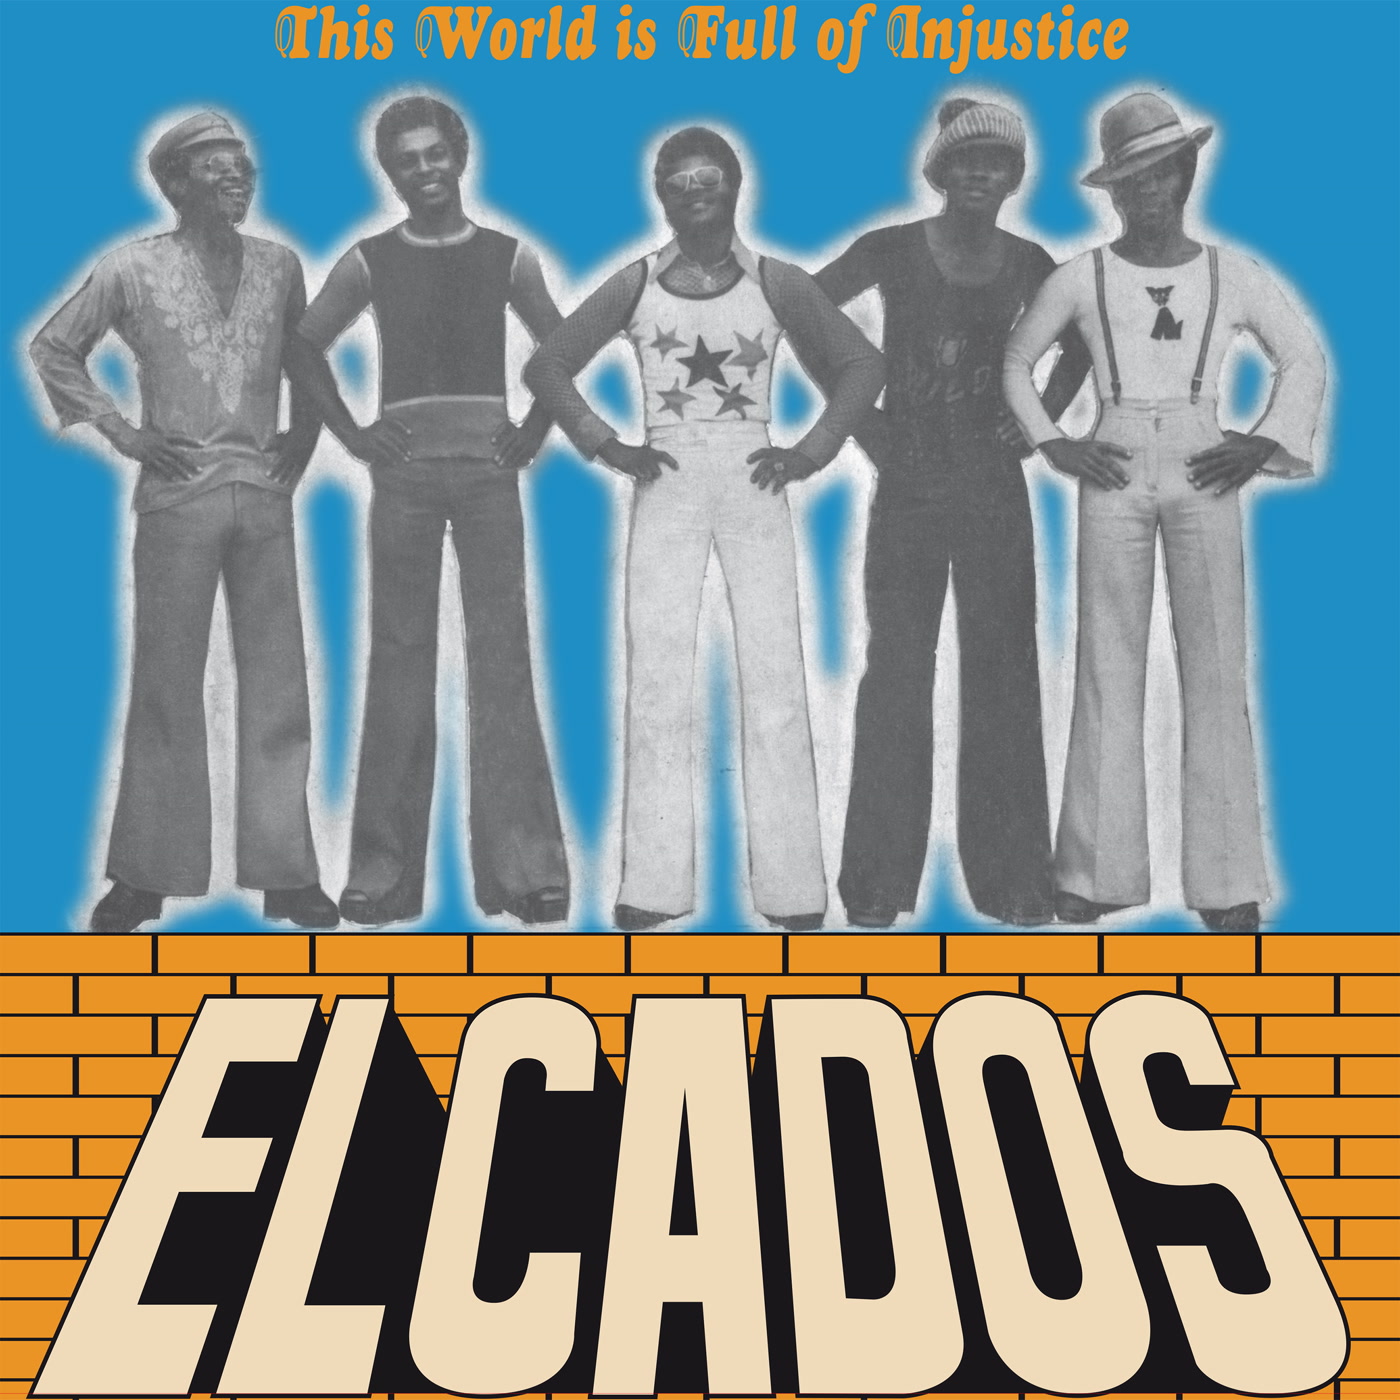 Elcados – I Was Stunned Into Speechlessness (Afrodelic)